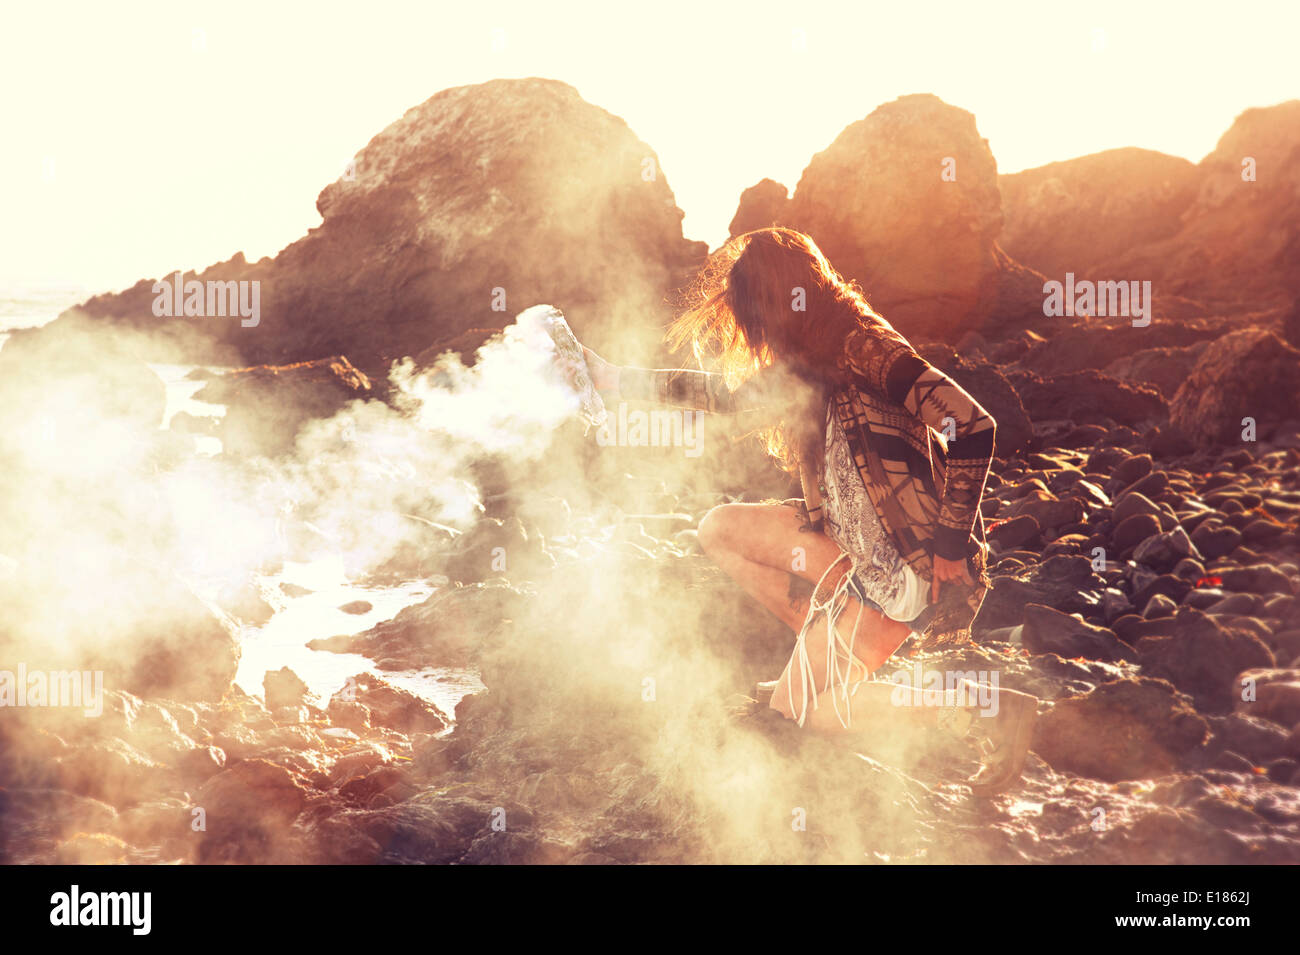 Smudge smoke offering on a rocky water seashore. Stock Photo